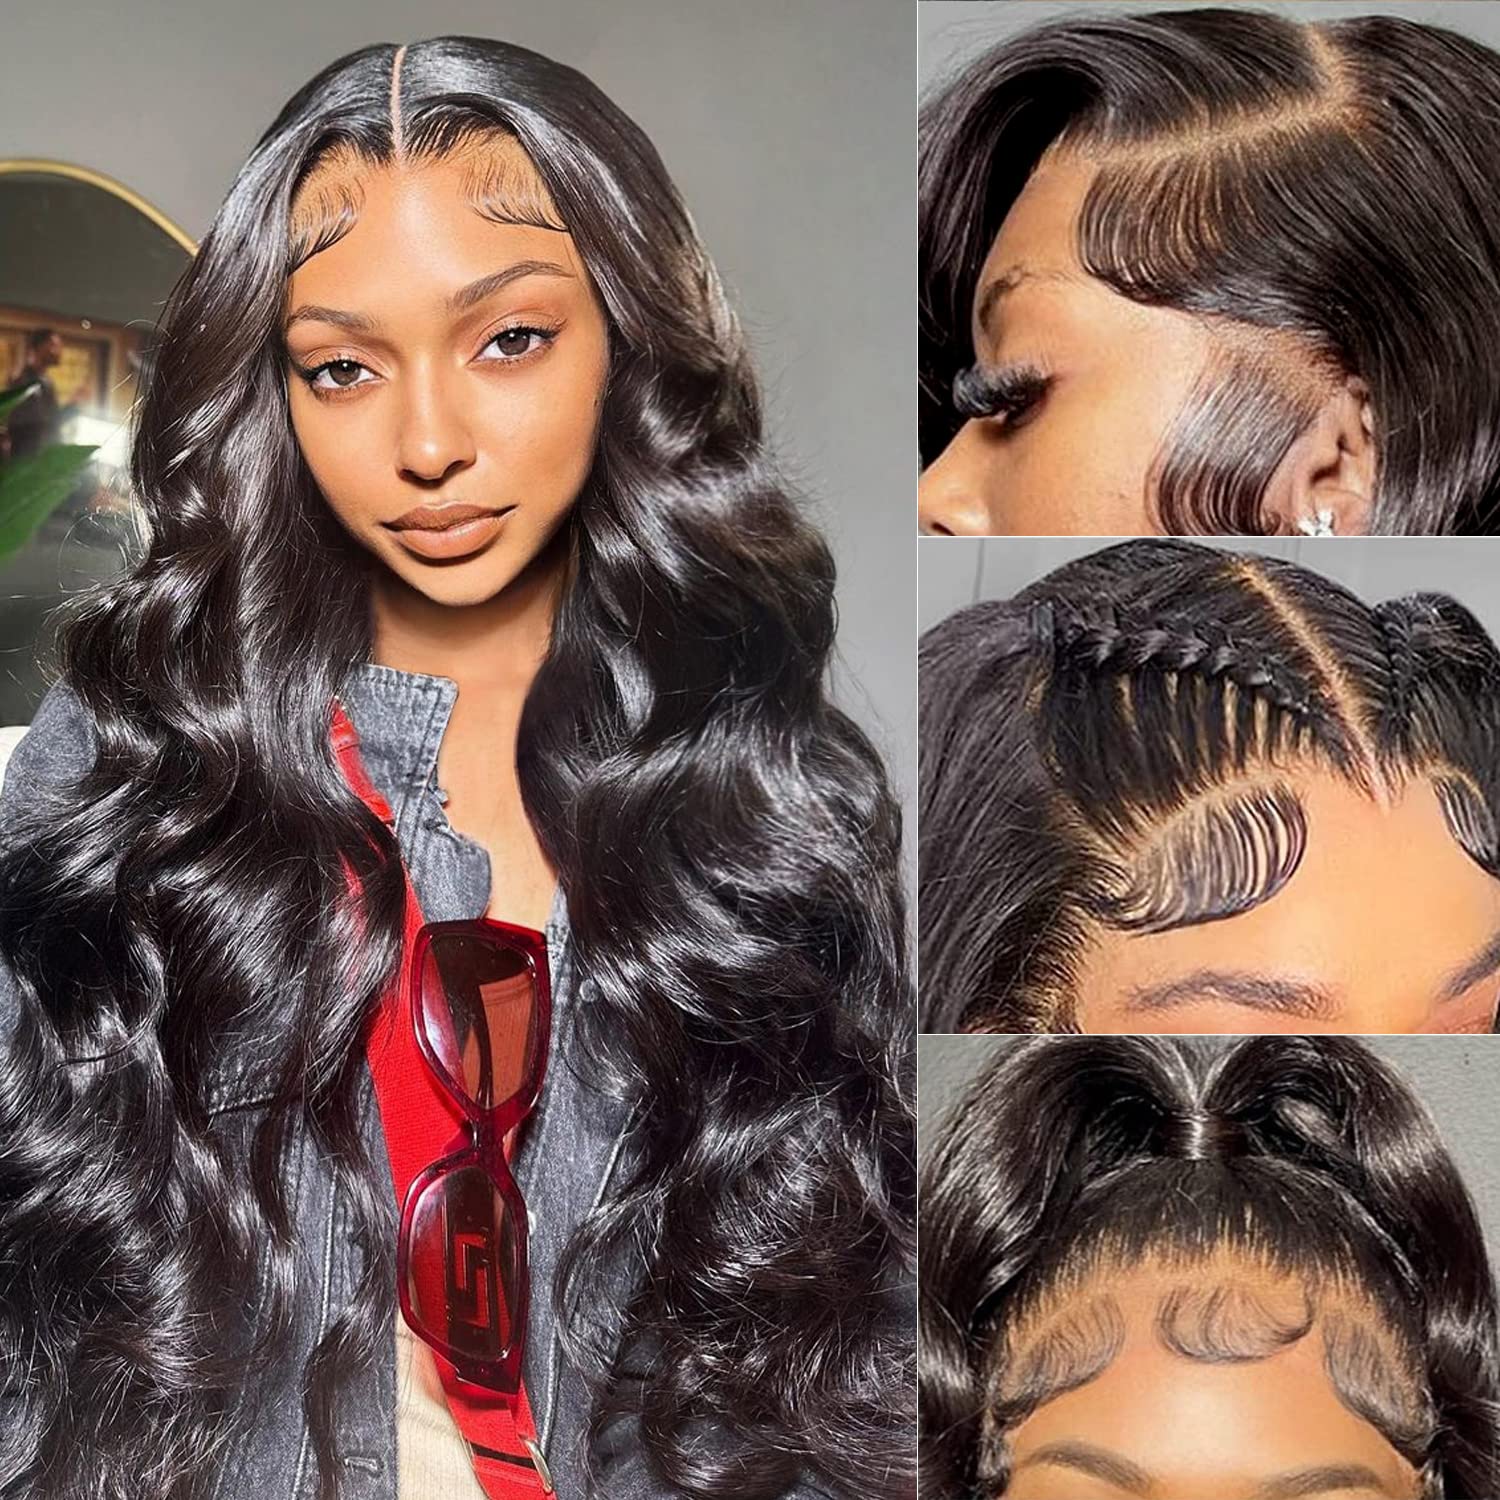 13X4 Hd Lace Frontal Wig 30 32 34 Inch Body Wave Lace Front Wig